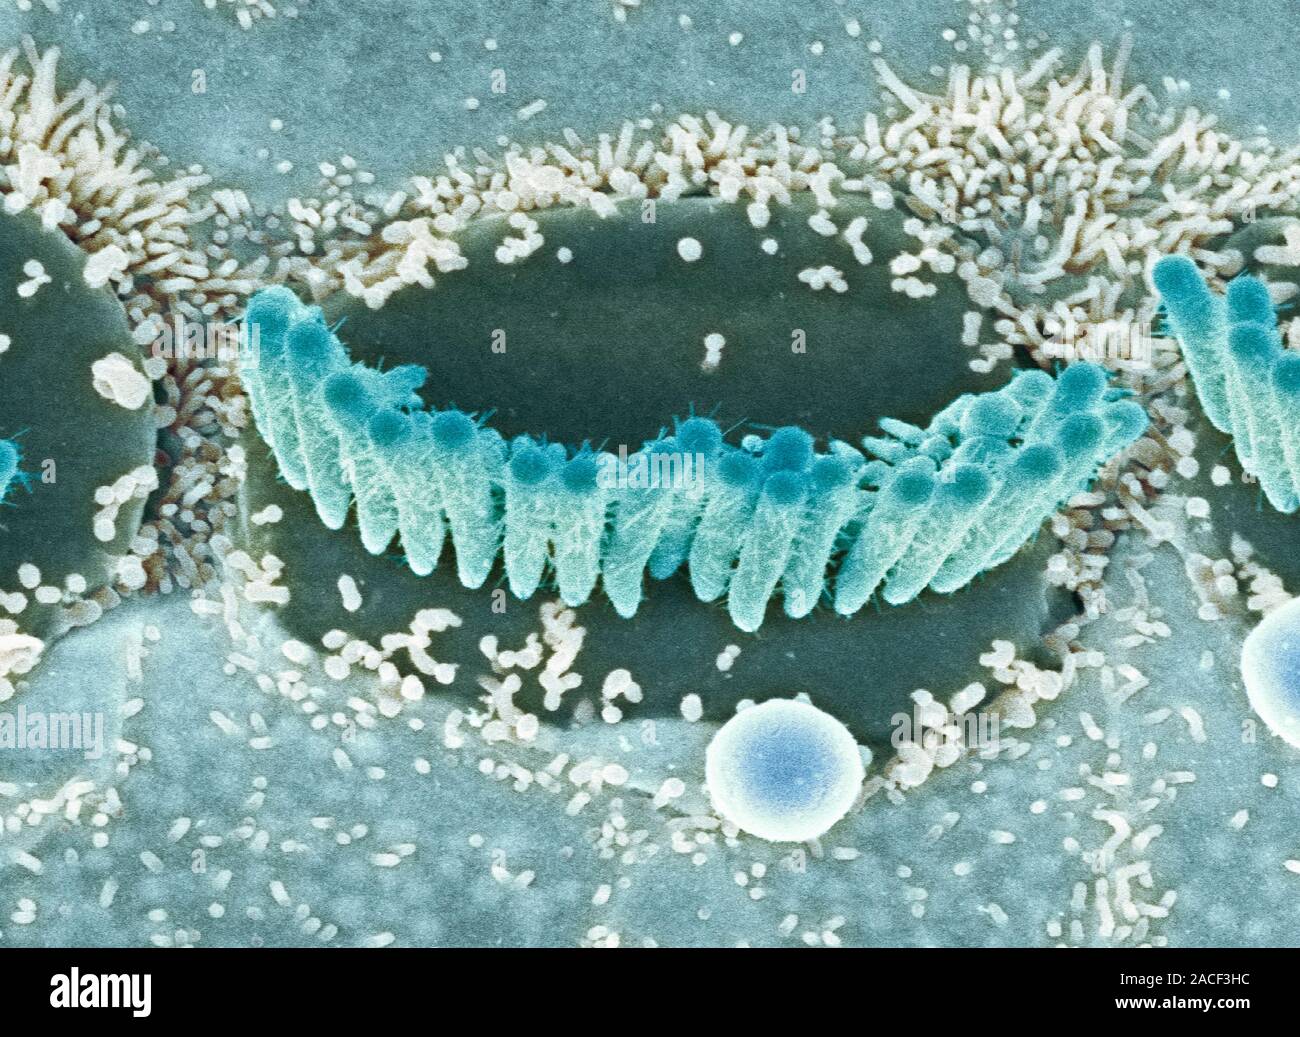 Inner ear hair cells. Coloured scanning electron micrograph (SEM) of sensory hair cells from the cochlea of the inner ear. The hairs are surrounded by Stock Photo